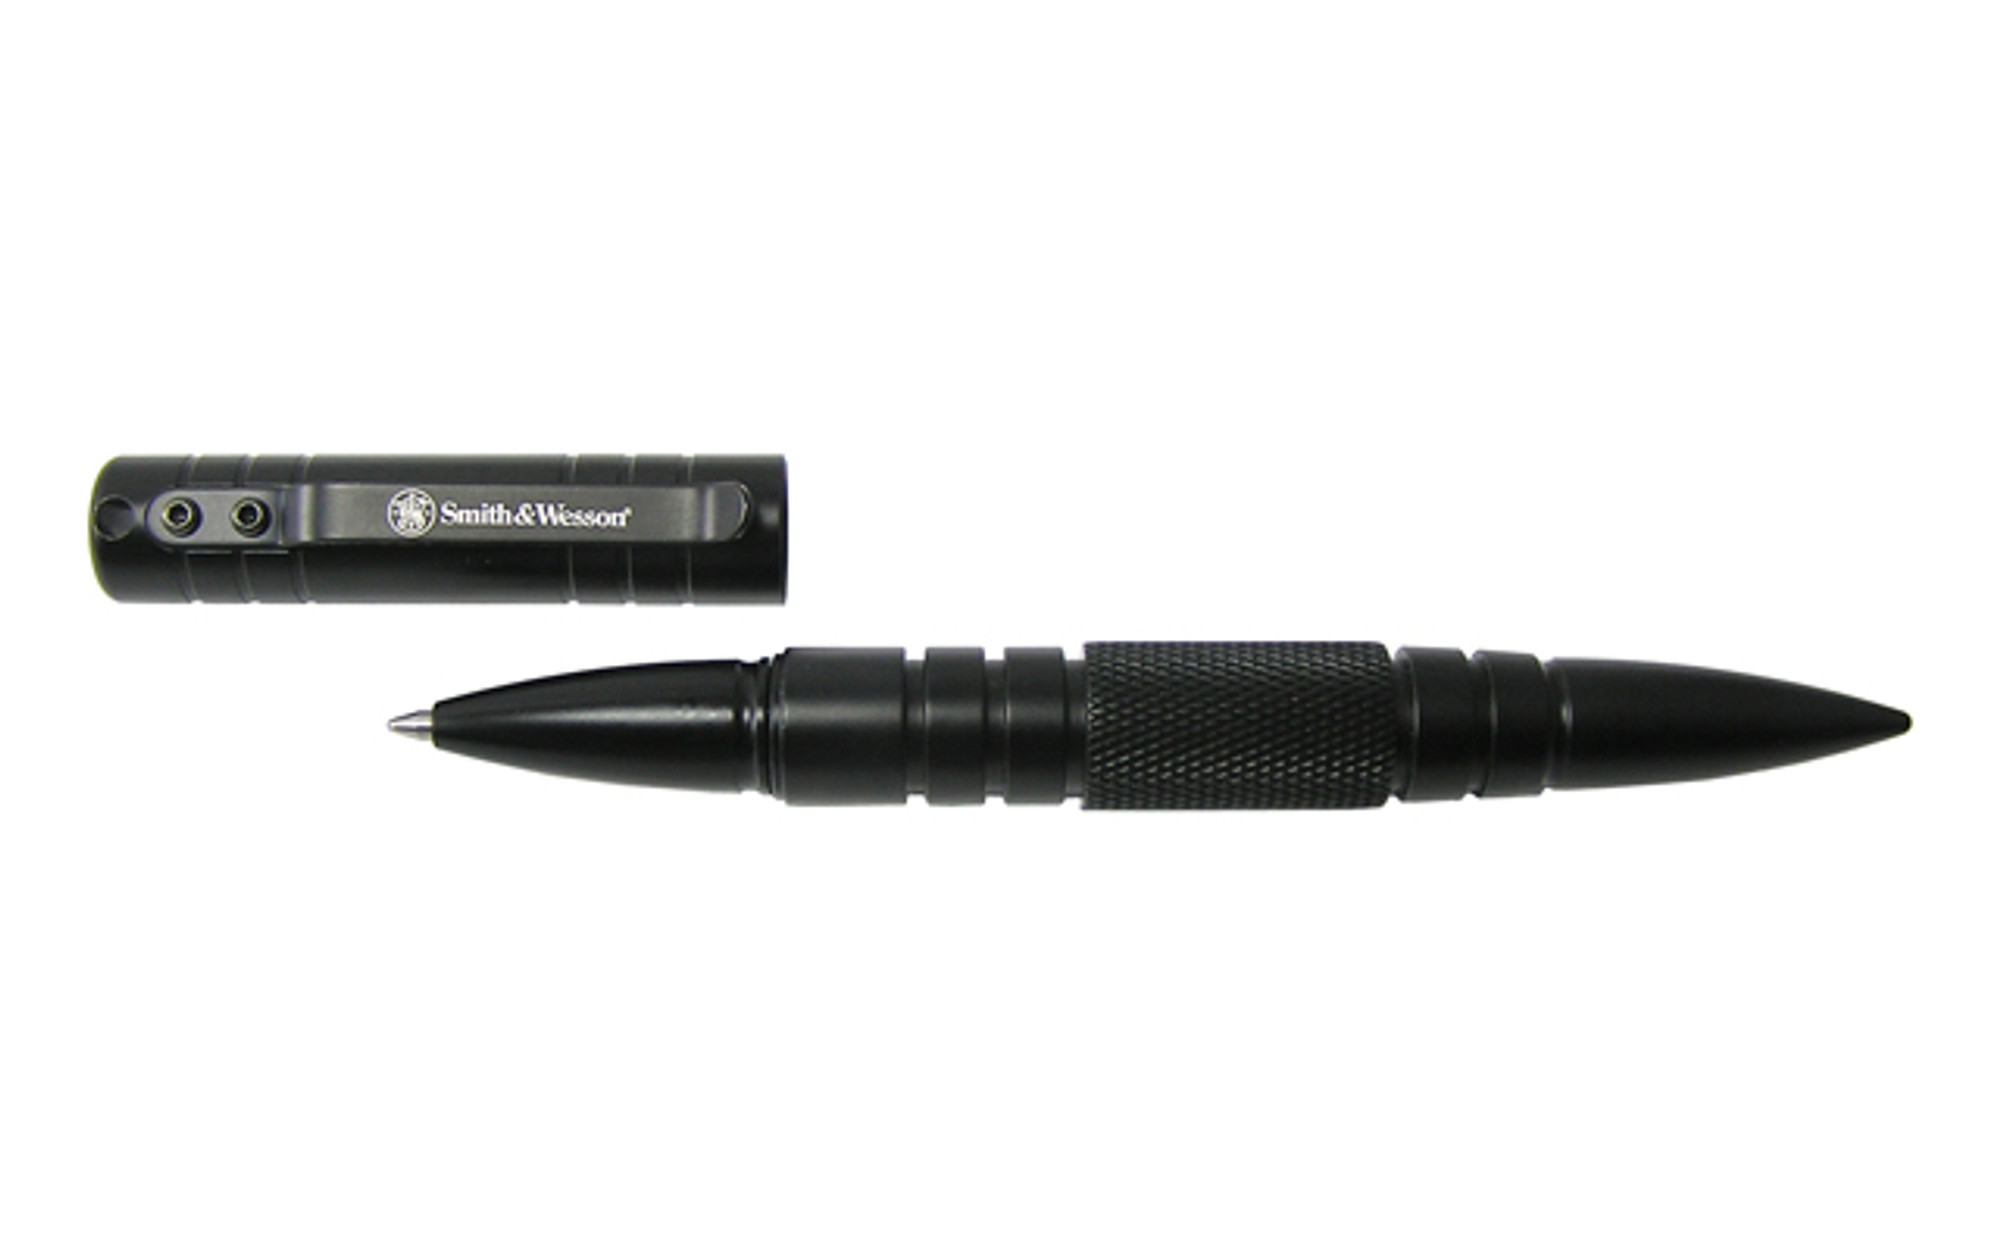 Smith & Wesson Military Police Tactical Pen - Black